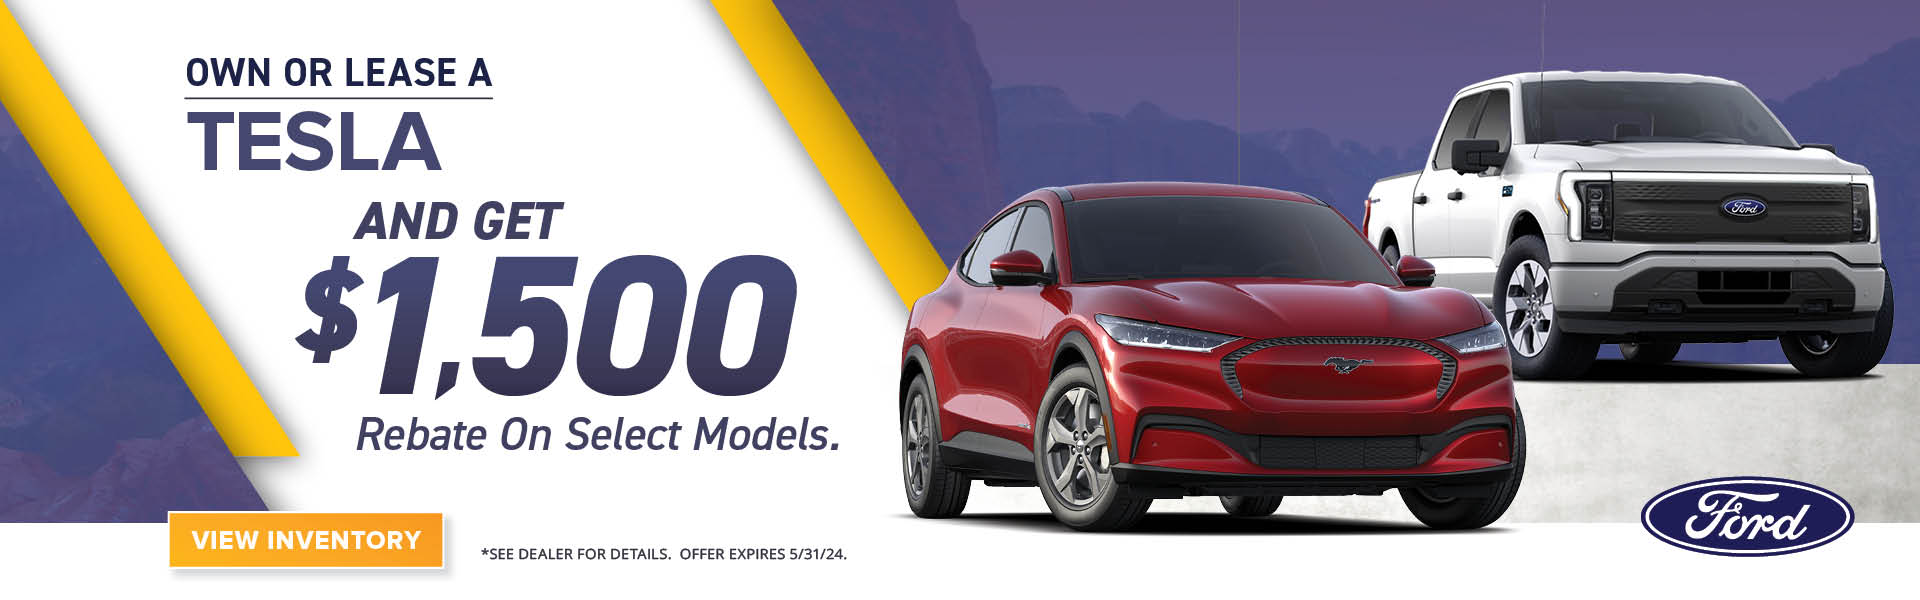 Own or lease a Tesla and get $1500.00 rebate on select mode